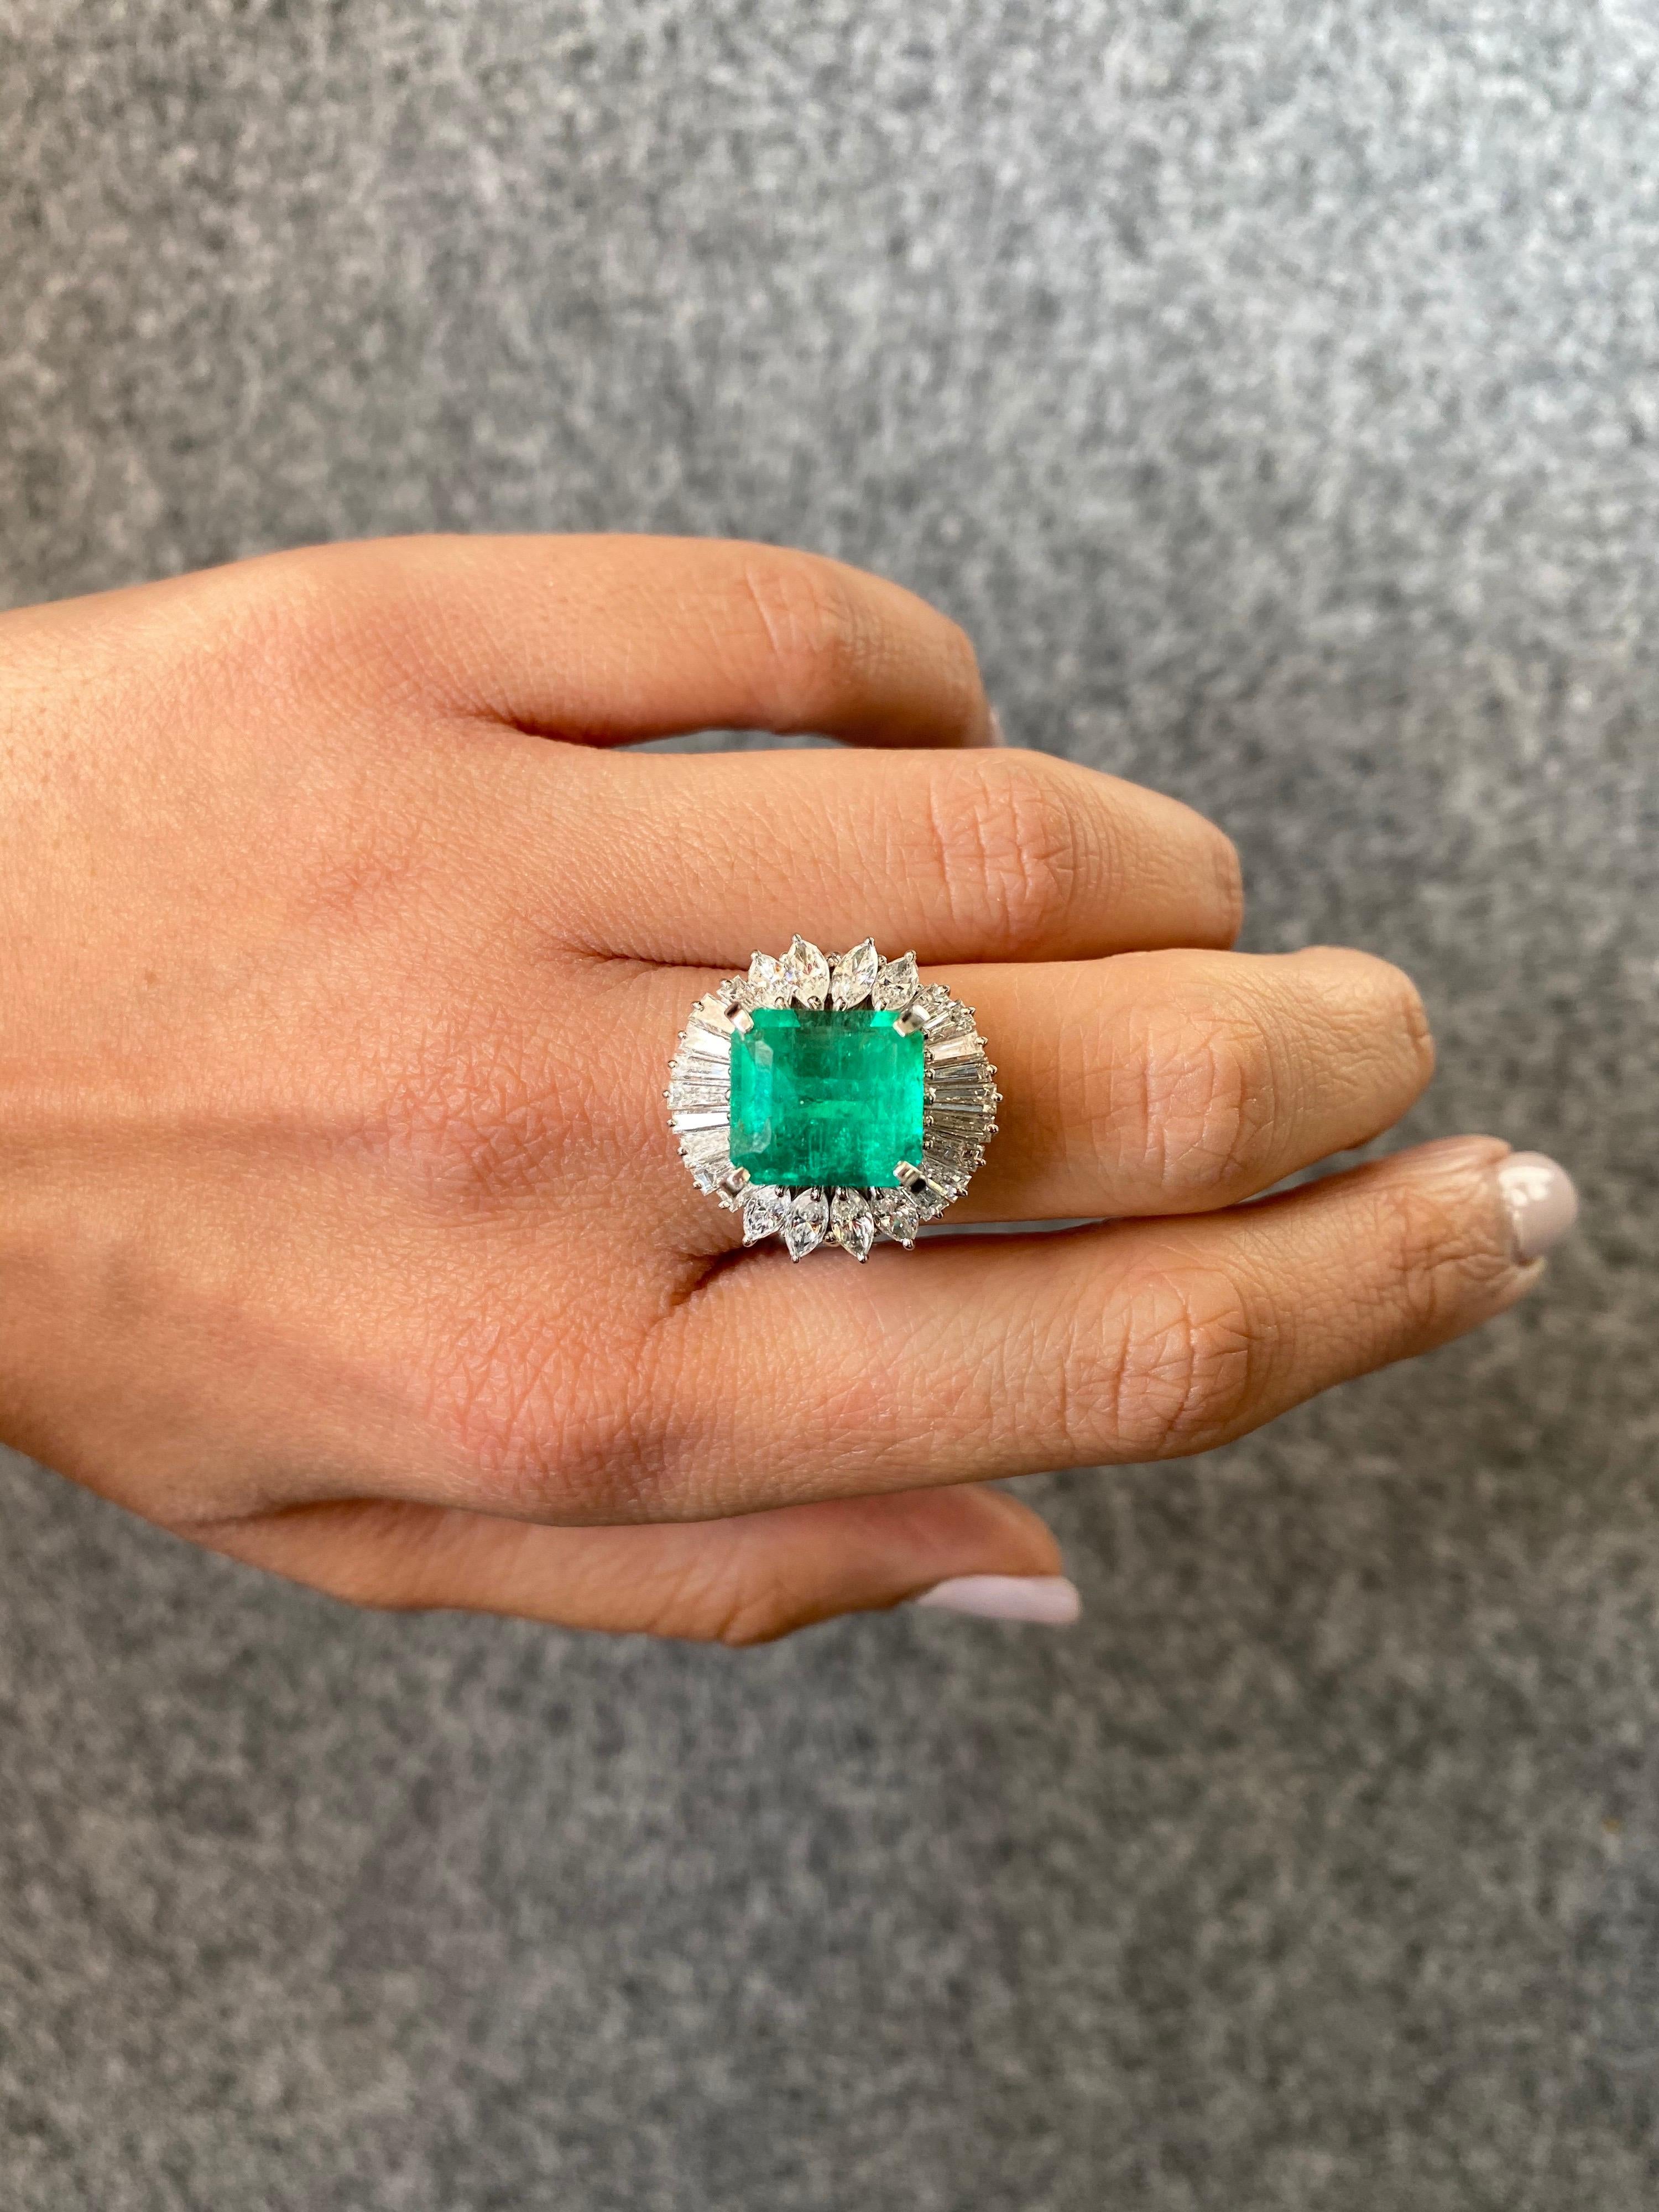 Beautiful art-deco certified 6.85 Colombian Emerald surrounded by colorless, VS quality Diamond baguettes and marquise cocktail ring, all set in solid 14.30 grams Platinum. Currently sized US 6, but can be altered.
Free shipping provided, and we